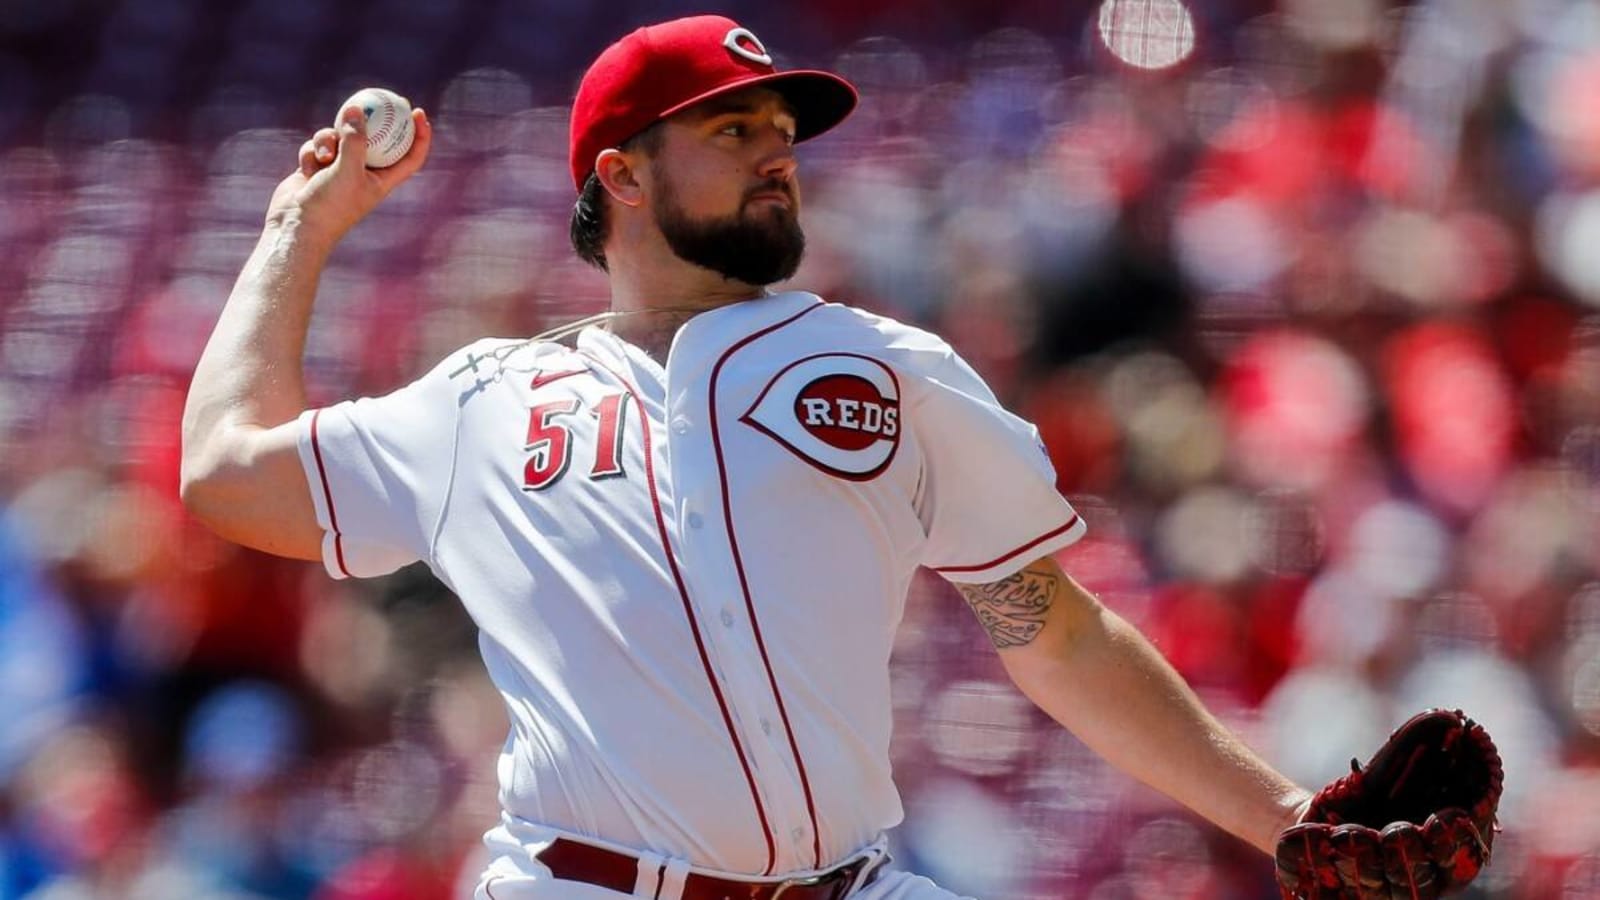 Graham Ashcraft: Reds Have Good Mix of Leadership in Starting Rotation